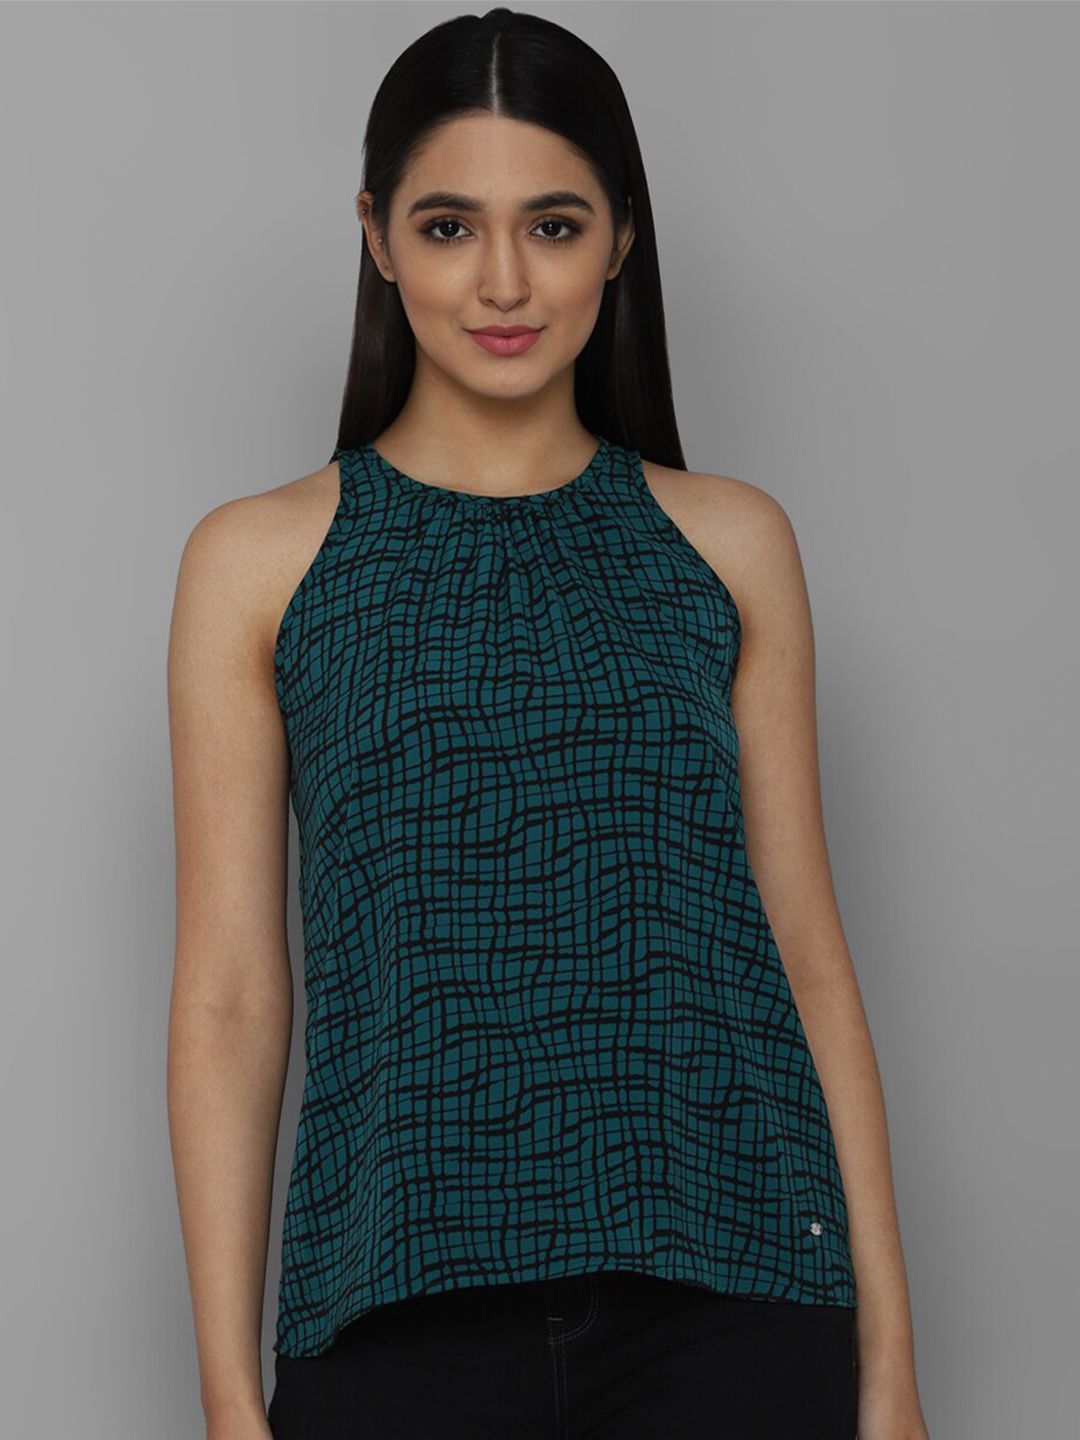 Allen Solly Woman Green Printed Top Price in India